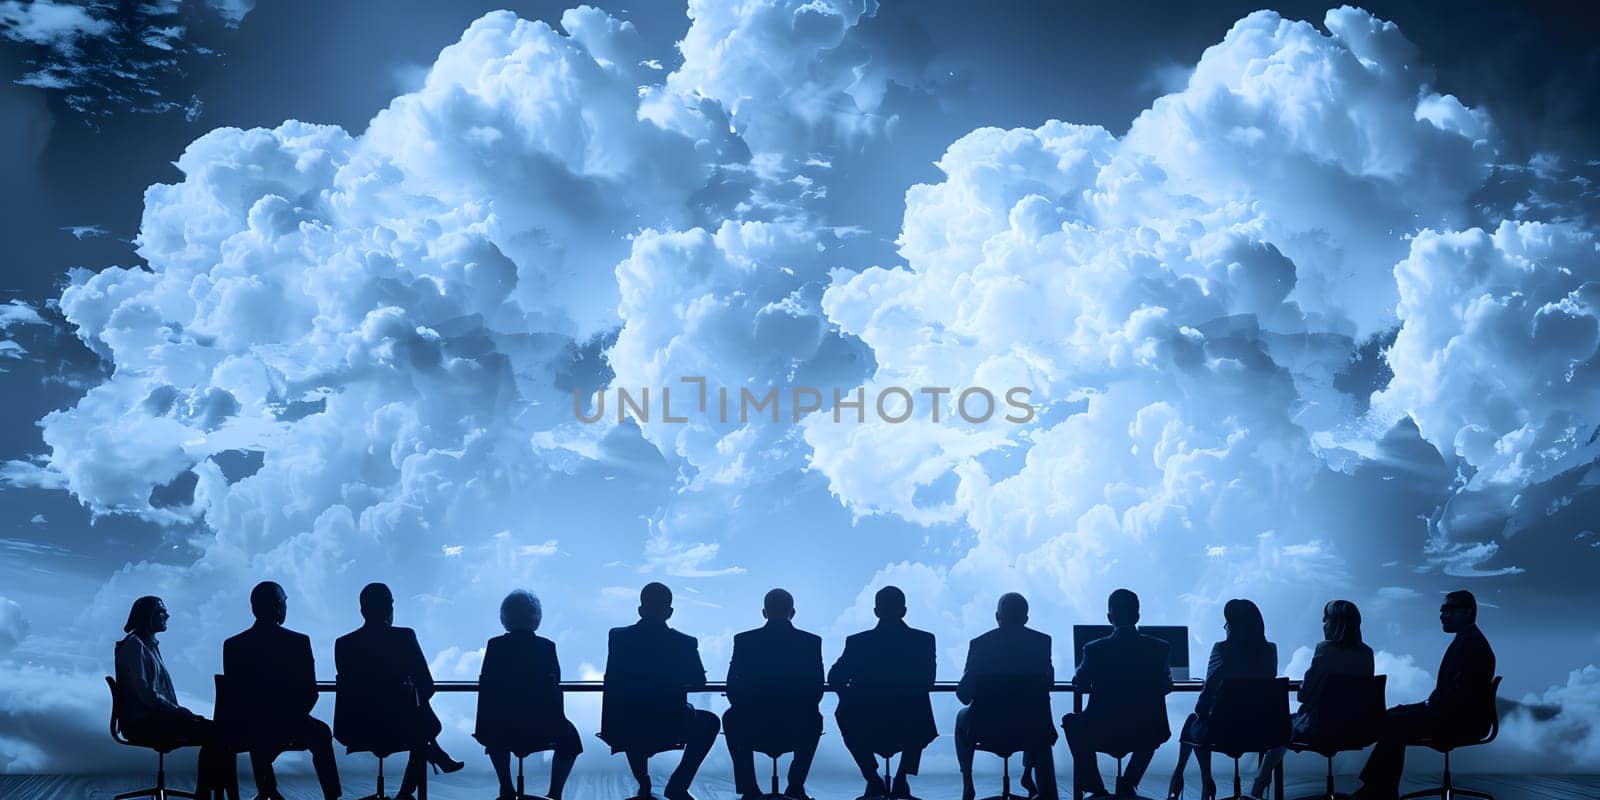 A crowd is sitting at a table under the cloudy sky, gesturing towards the world above. They seem ready to travel by aircraft over water and explore new horizons